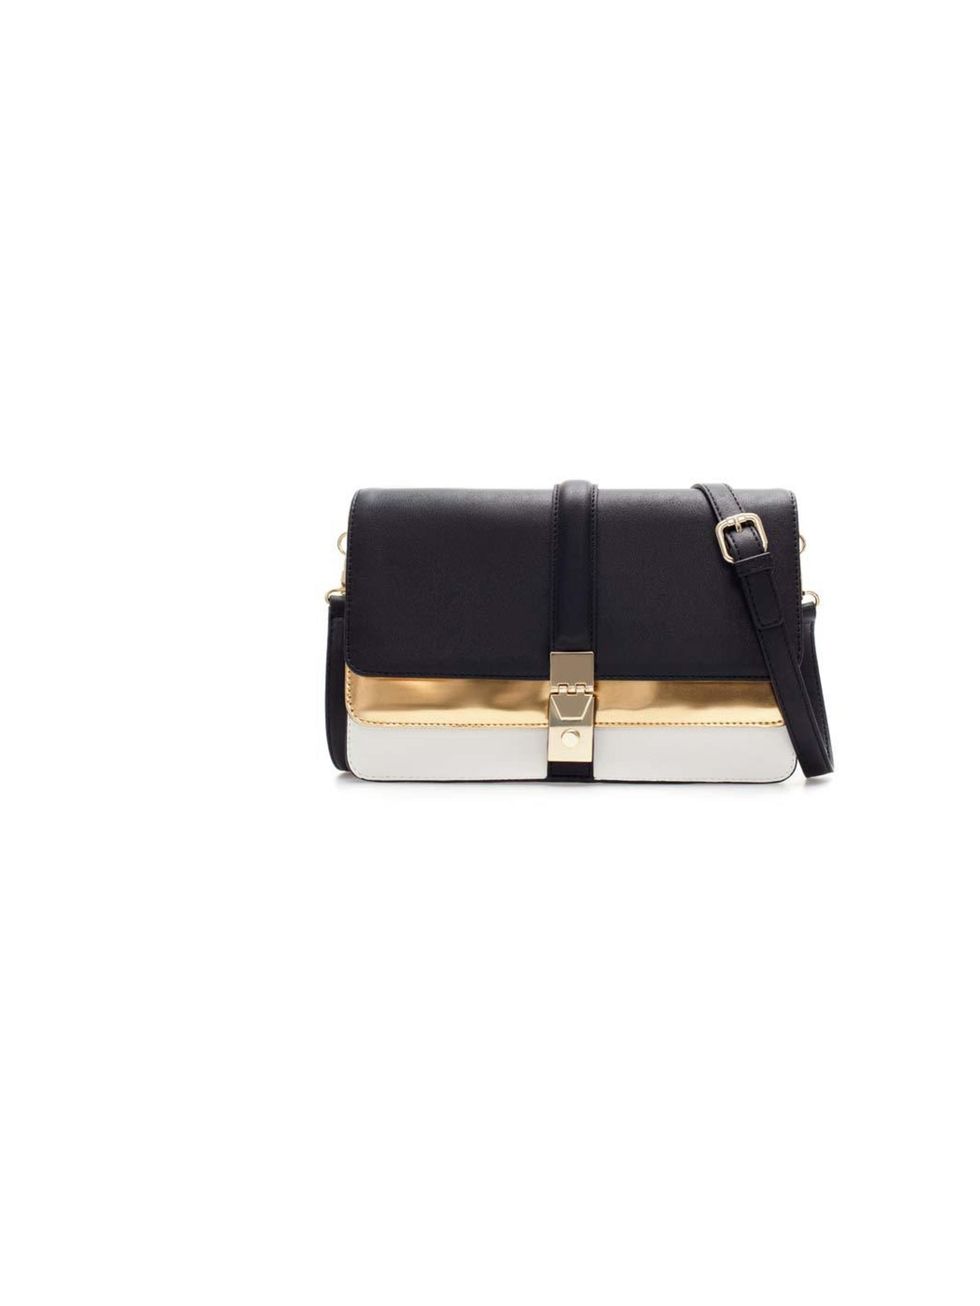 <p>Commissioning Editor Hannah Swerling has her eye on this Zara bag - a monochrome classic with a nod to this season's trend for metallics.</p><p><a href="http://www.zara.com/uk/en/new-collection/woman/handbags/city-bag-with-two-metallic-foldover-flaps-c